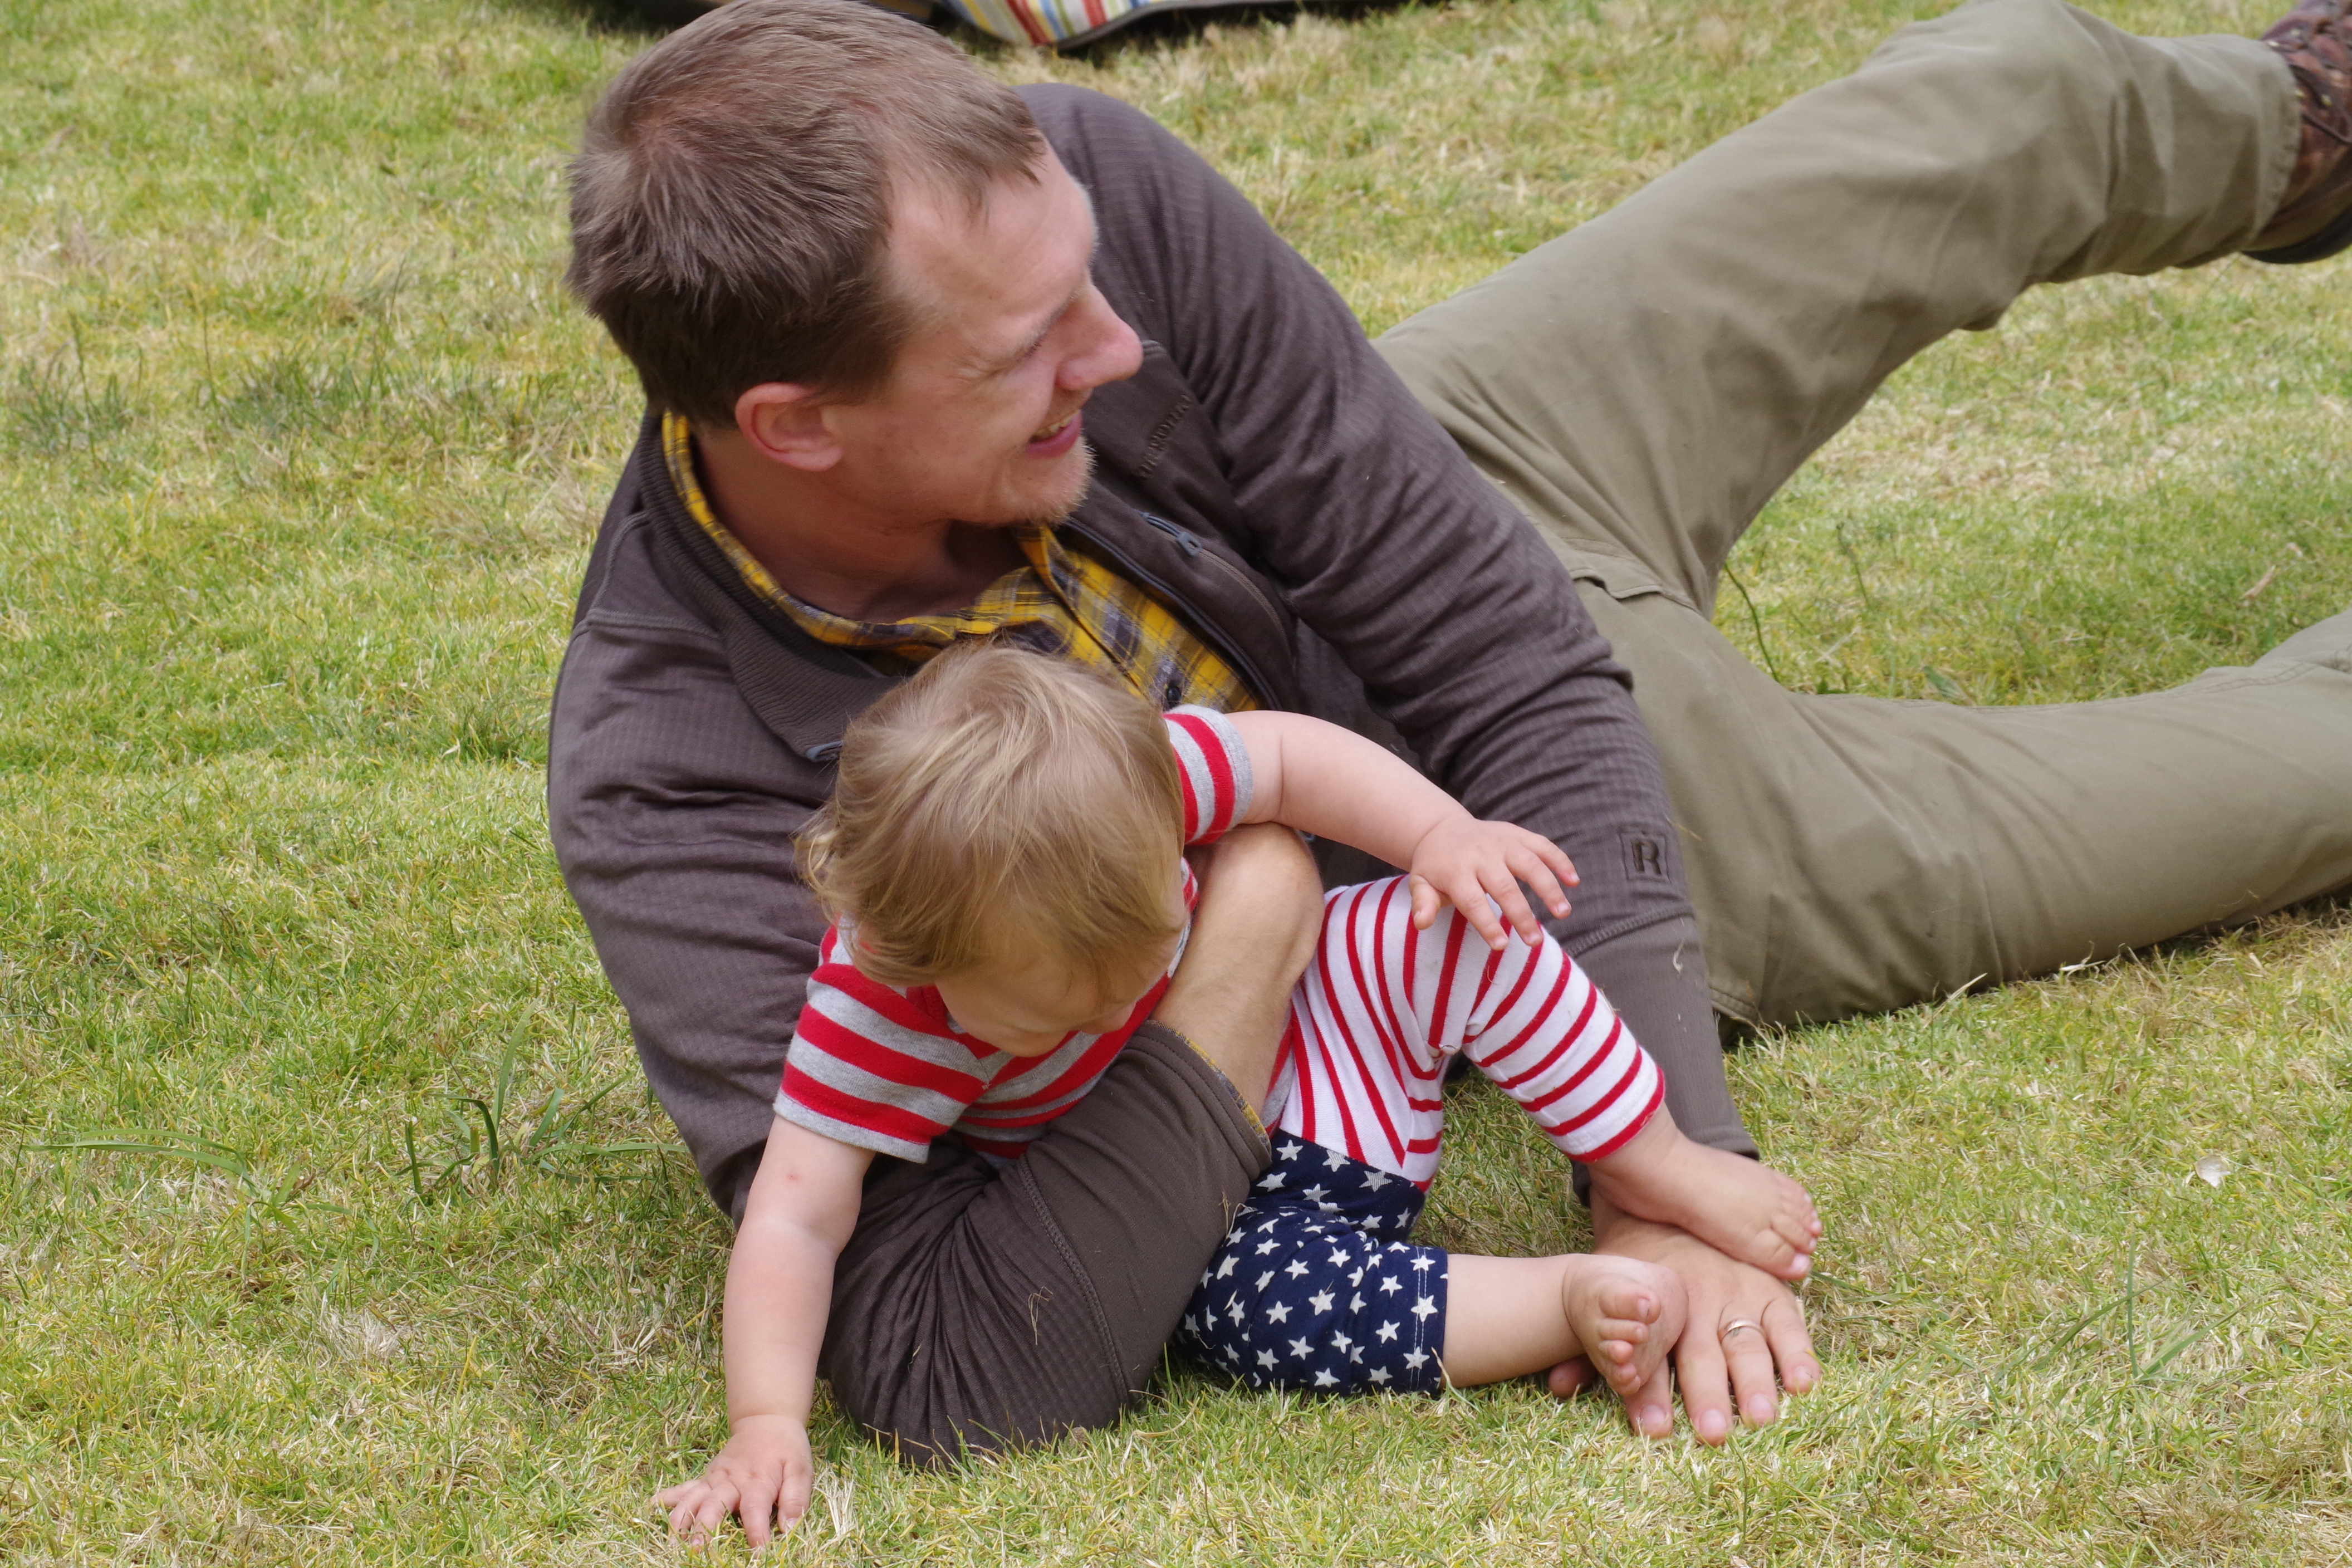 Man and child in American flag outfit playing in the grass